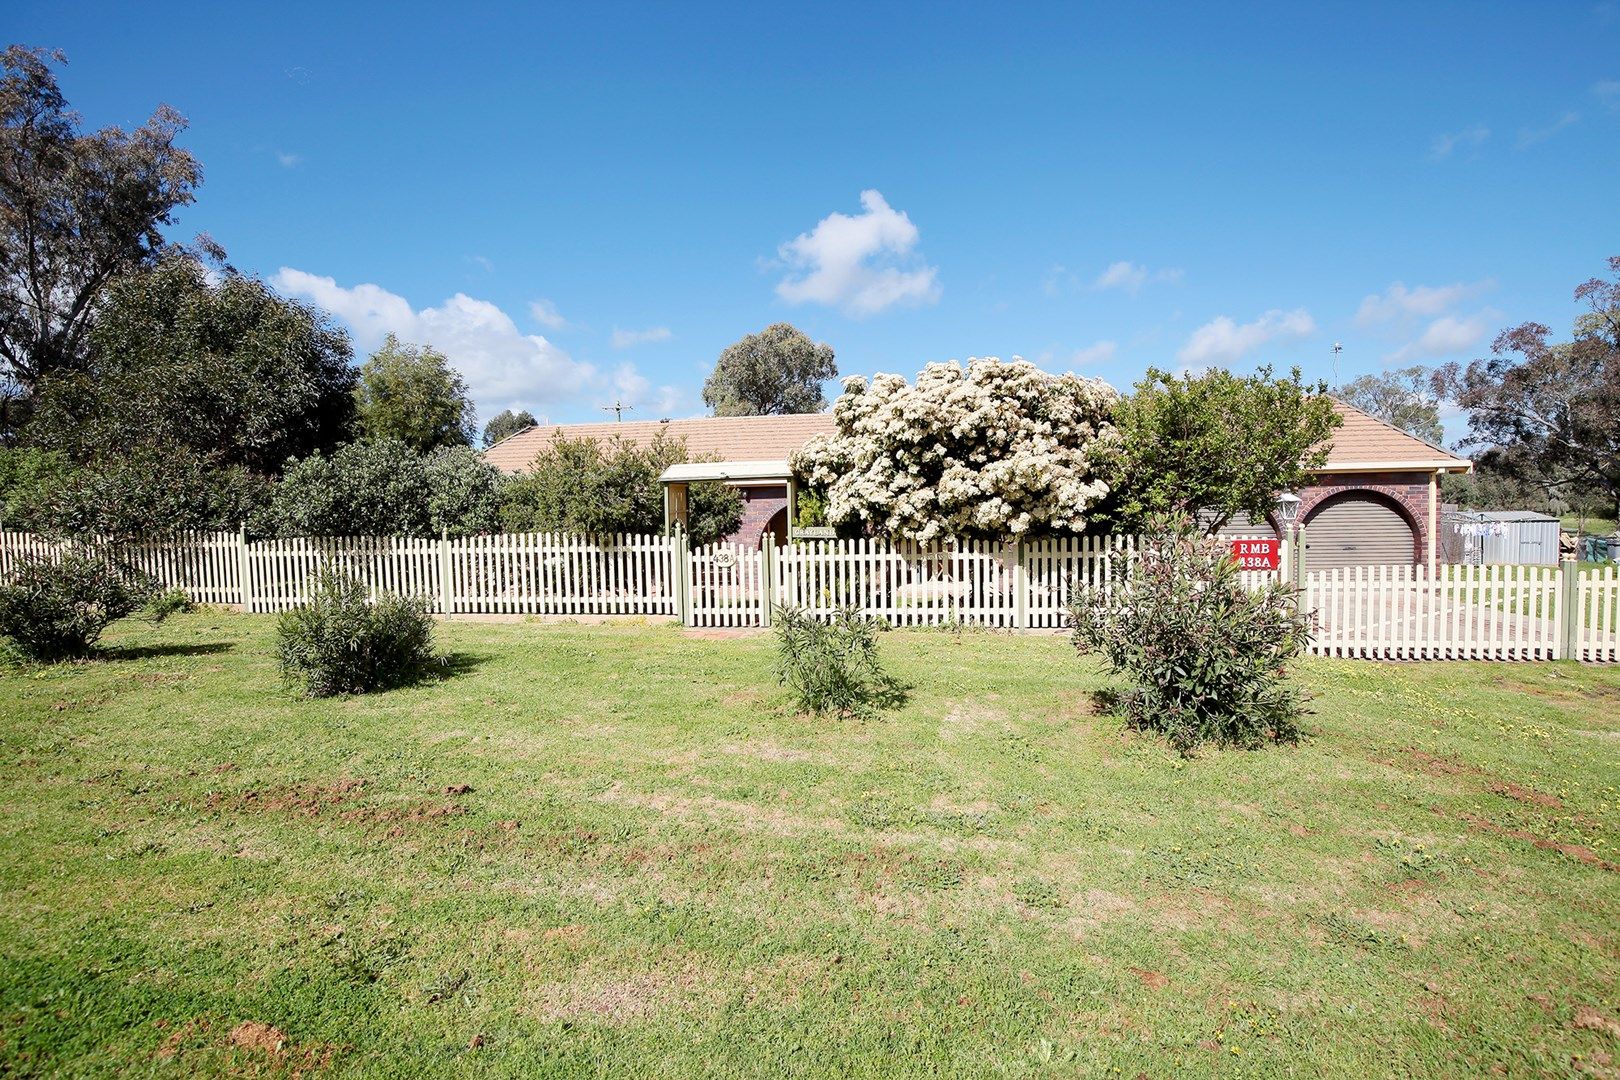 RMB 438A Jarvis Street, Oura NSW 2650, Image 0